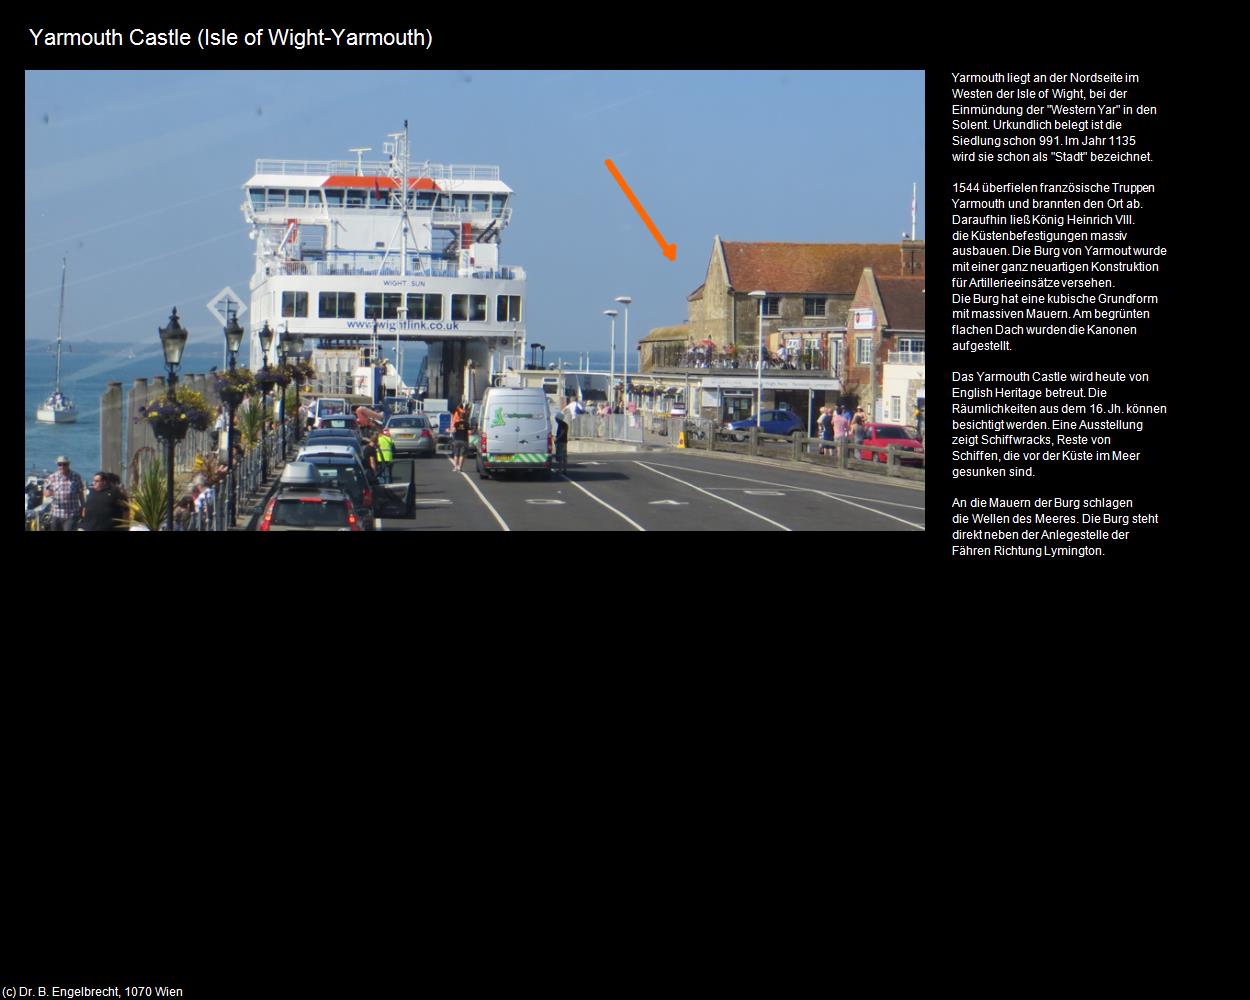 Yarmouth Castle (Yarmouth) (Isle of Wight) in Kulturatlas-ENGLAND und WALES